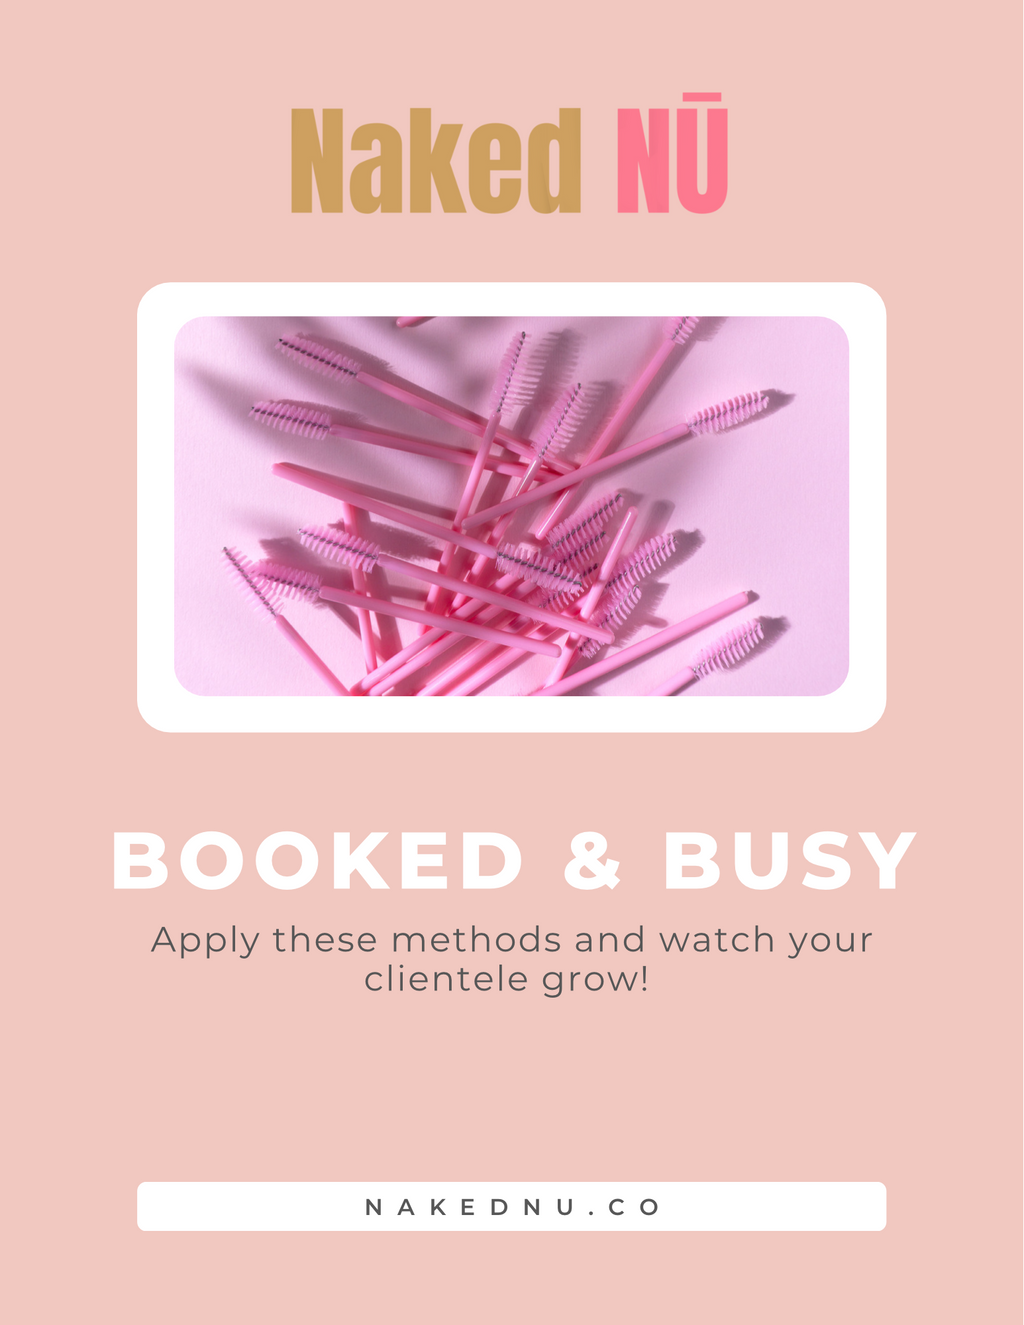 Digital Ebook to help individuals build their own beauty industry.